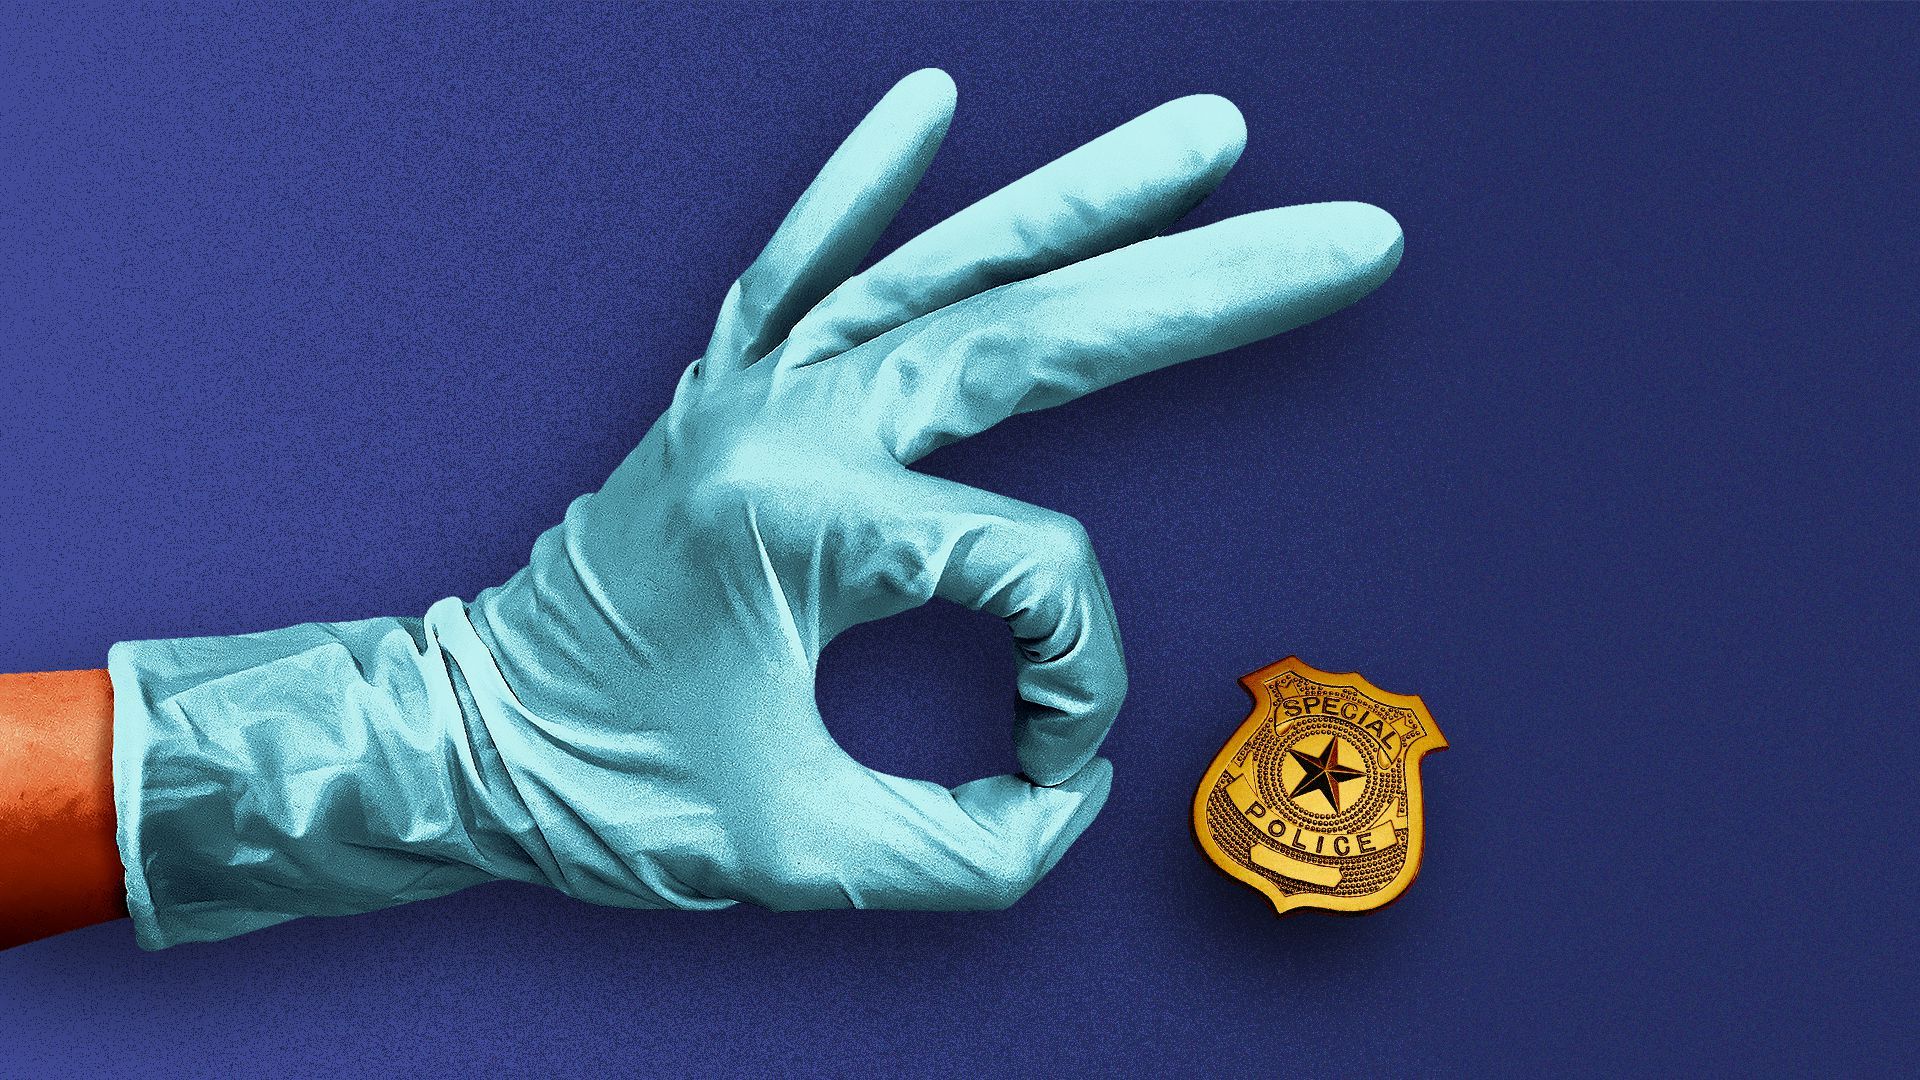 Illustration of a gloved hand about to flick a police badge. 